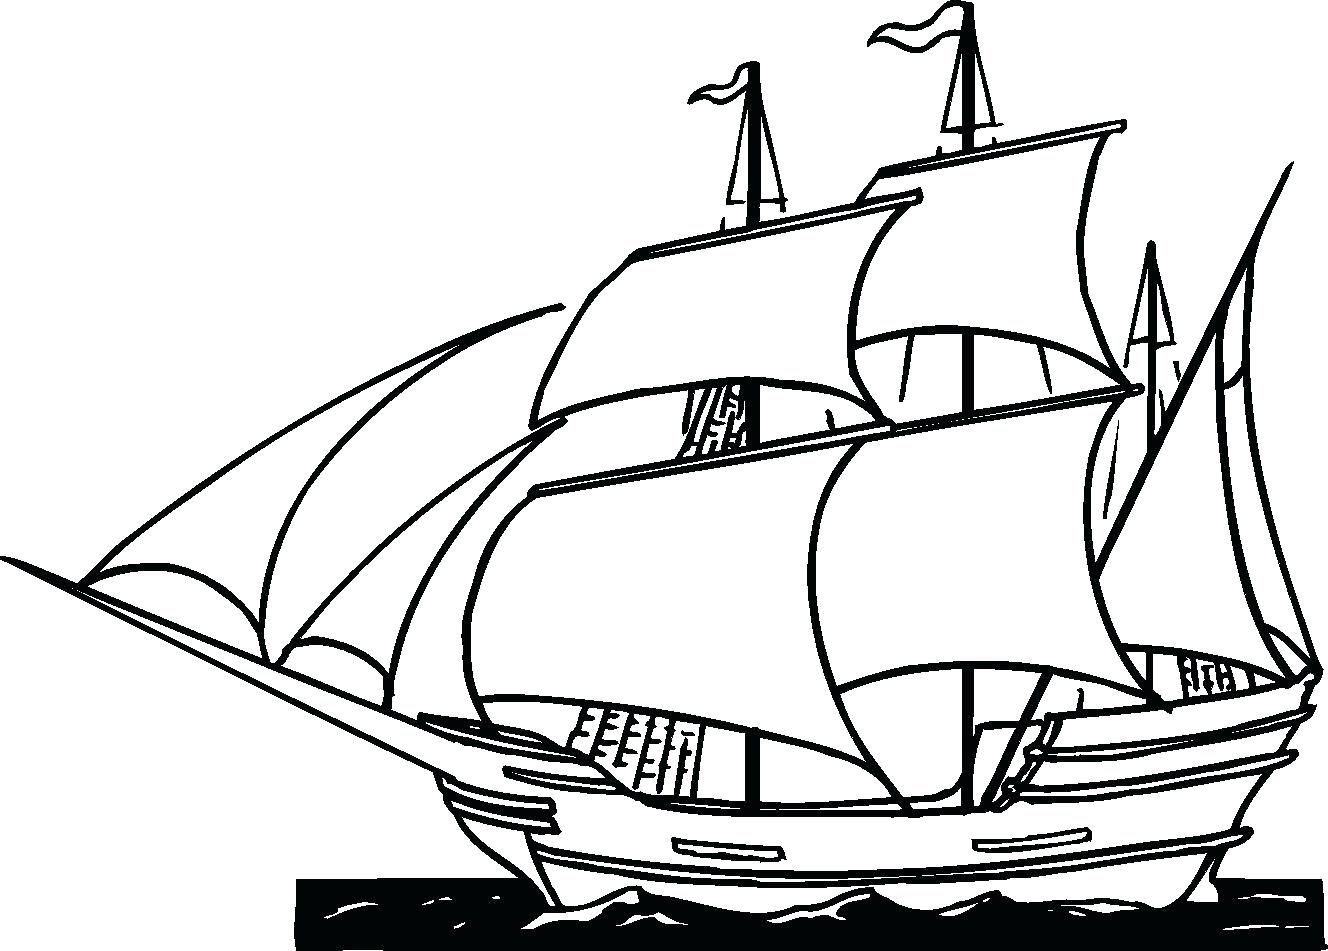 Cruise Ship Coloring Page At GetColorings Free Printable Colorings Pages To Print And Color